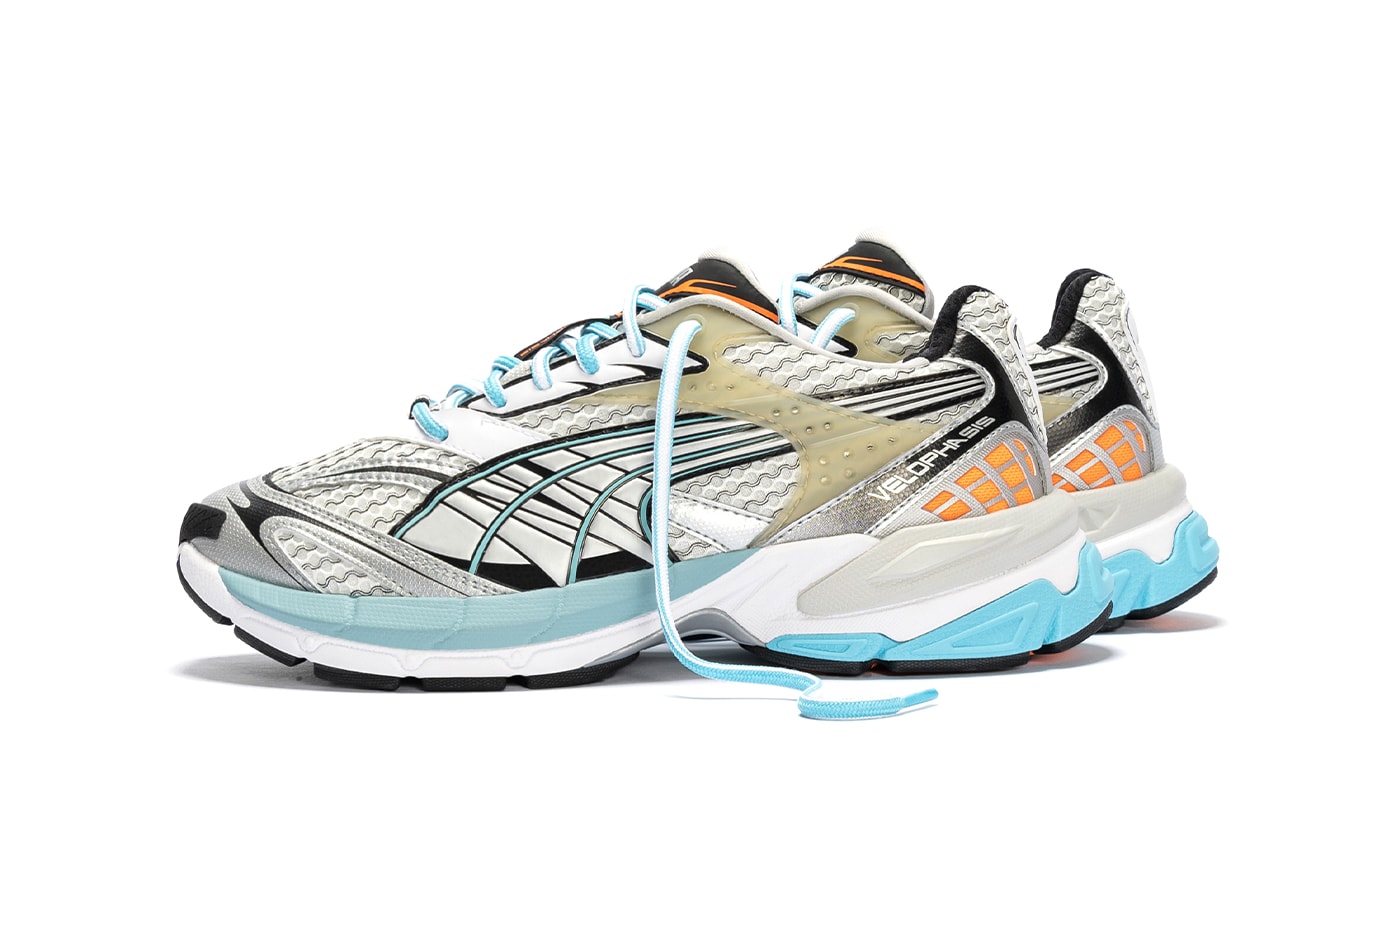 puma velophasis bionic phased new footwear sneaker silhouette release info date price